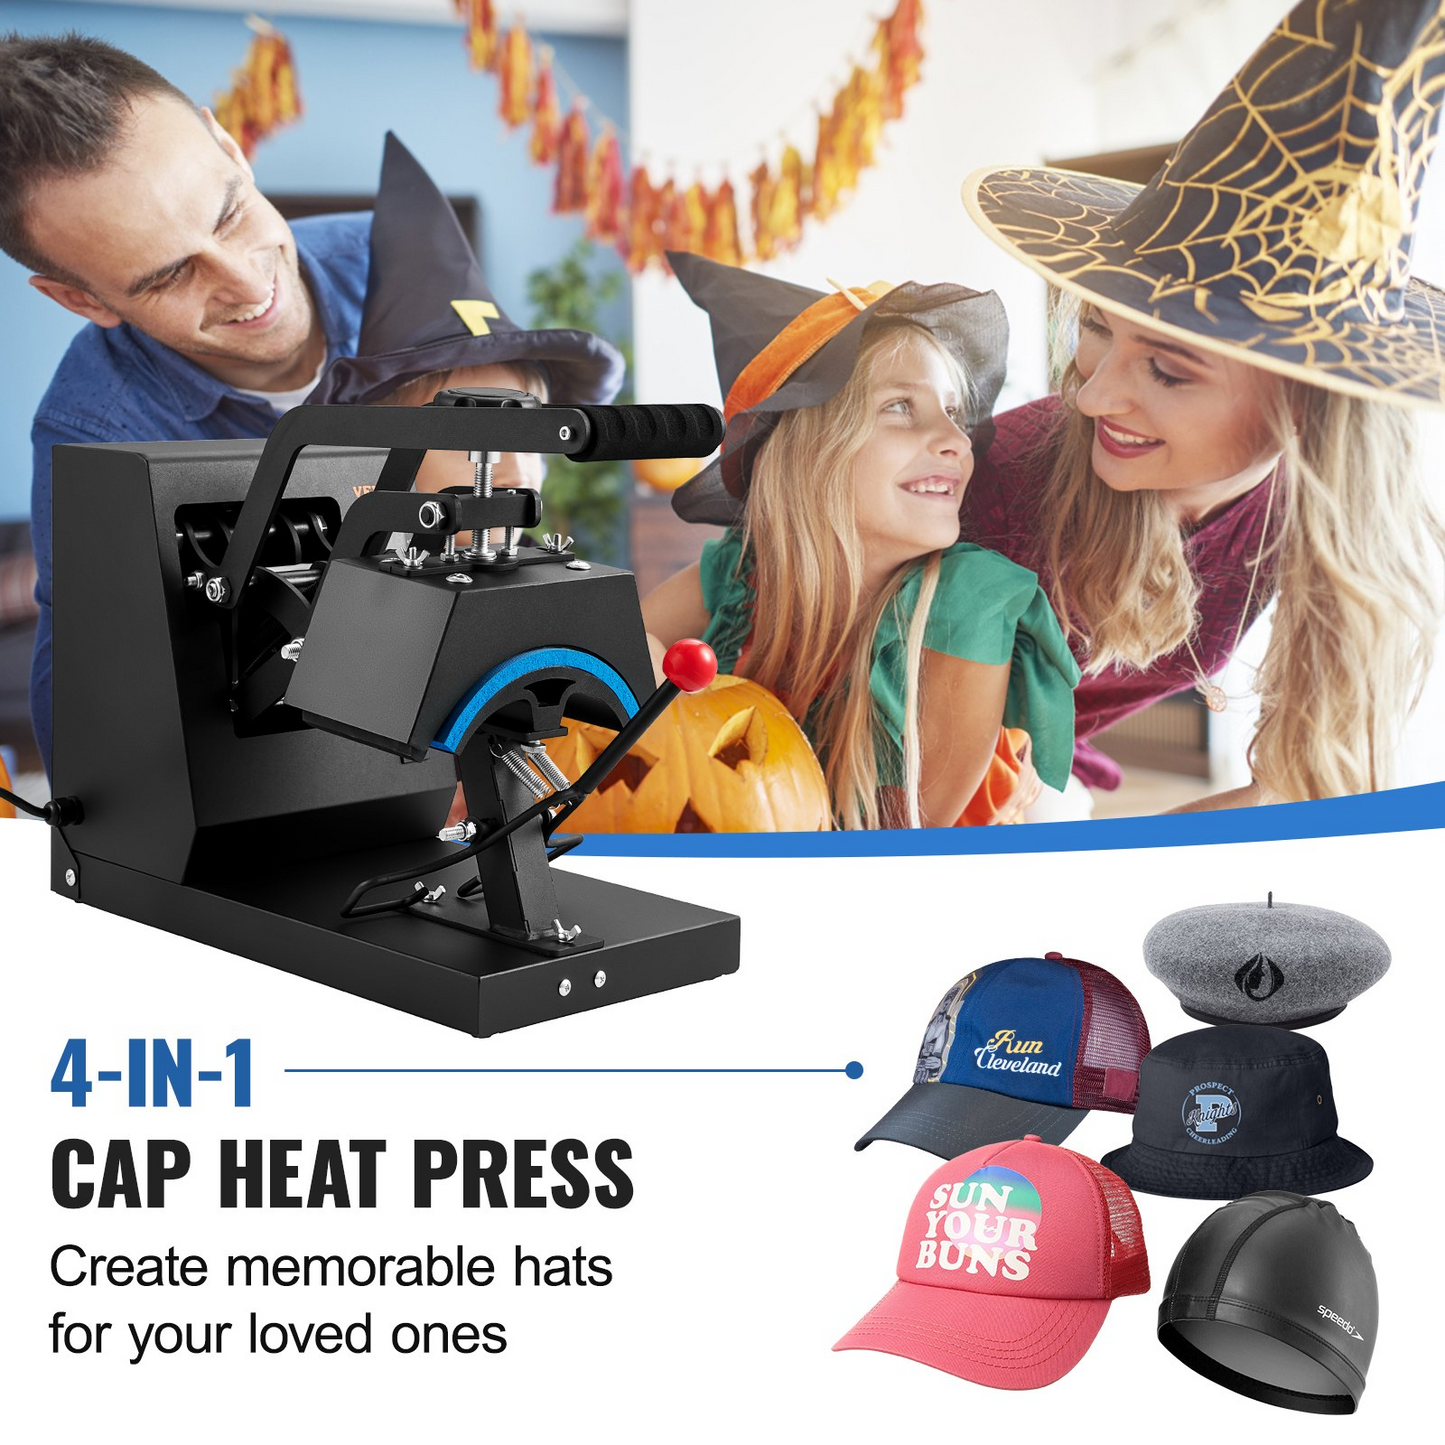 VEVOR Hat Heat Press, 4-in-1 Cap Heat Press Machine, 6x3inches Clamshell Sublimation Transfer, LCD Digital Timer Temperature Control with 4pcs Curved Heating Elements (6x3/6.7x2.7/6.7x2.7/8.1x3.5), Goodies N Stuff